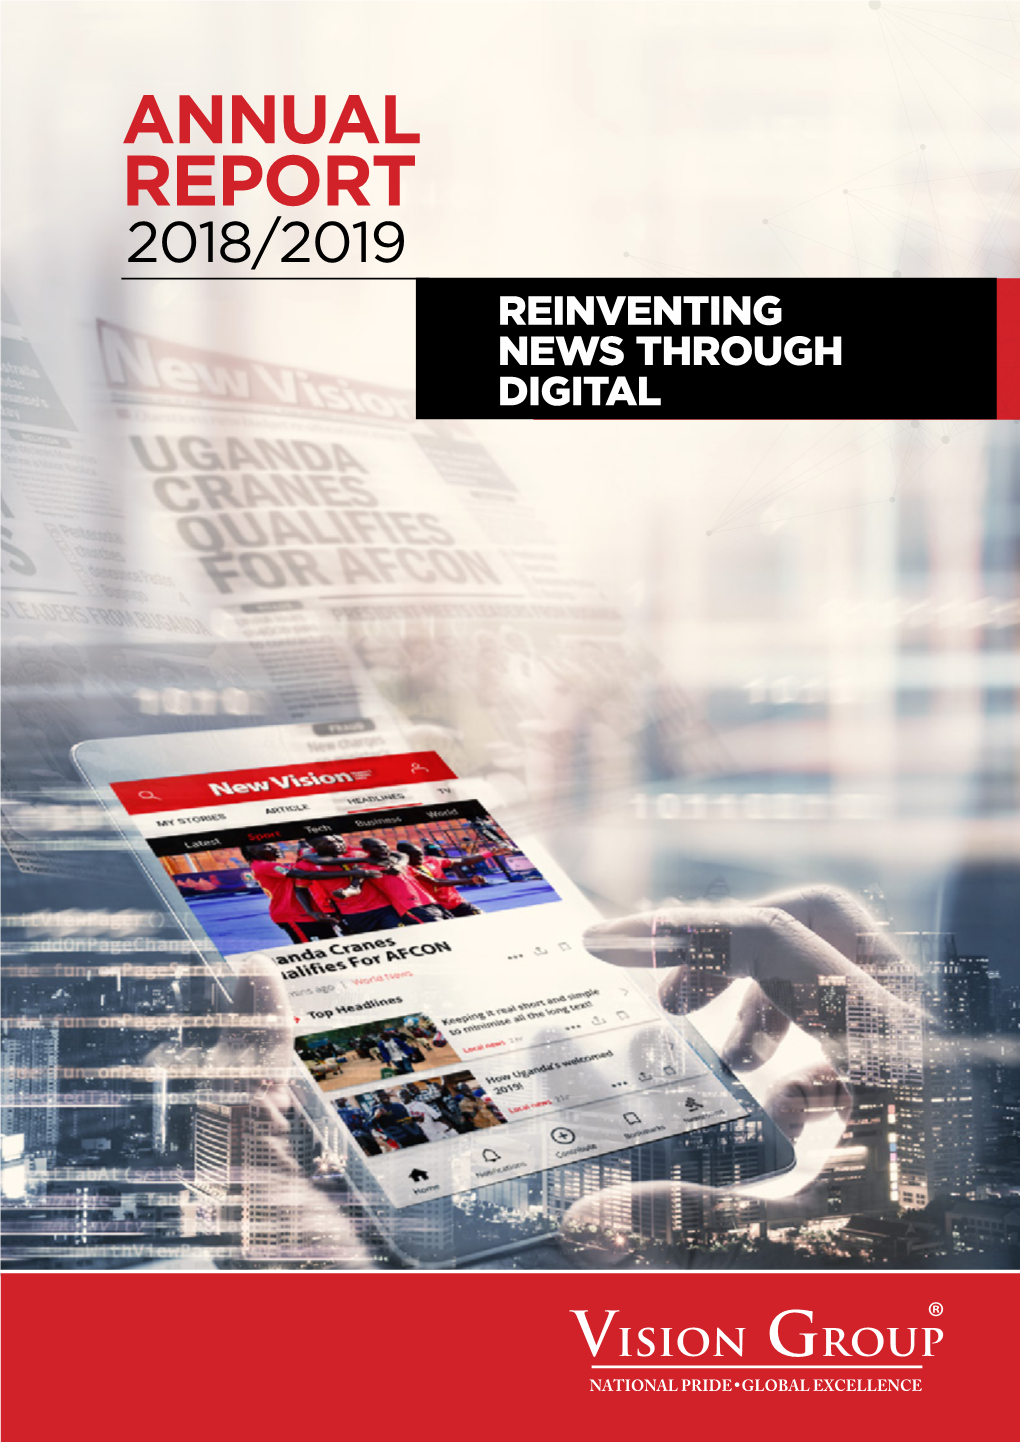 Annual Report 2018/19 01 ANNUAL REPORT 2018/2019 REINVENTING NEWS THROUGH DIGITAL Vision Group 02 Annual Report 2018/19